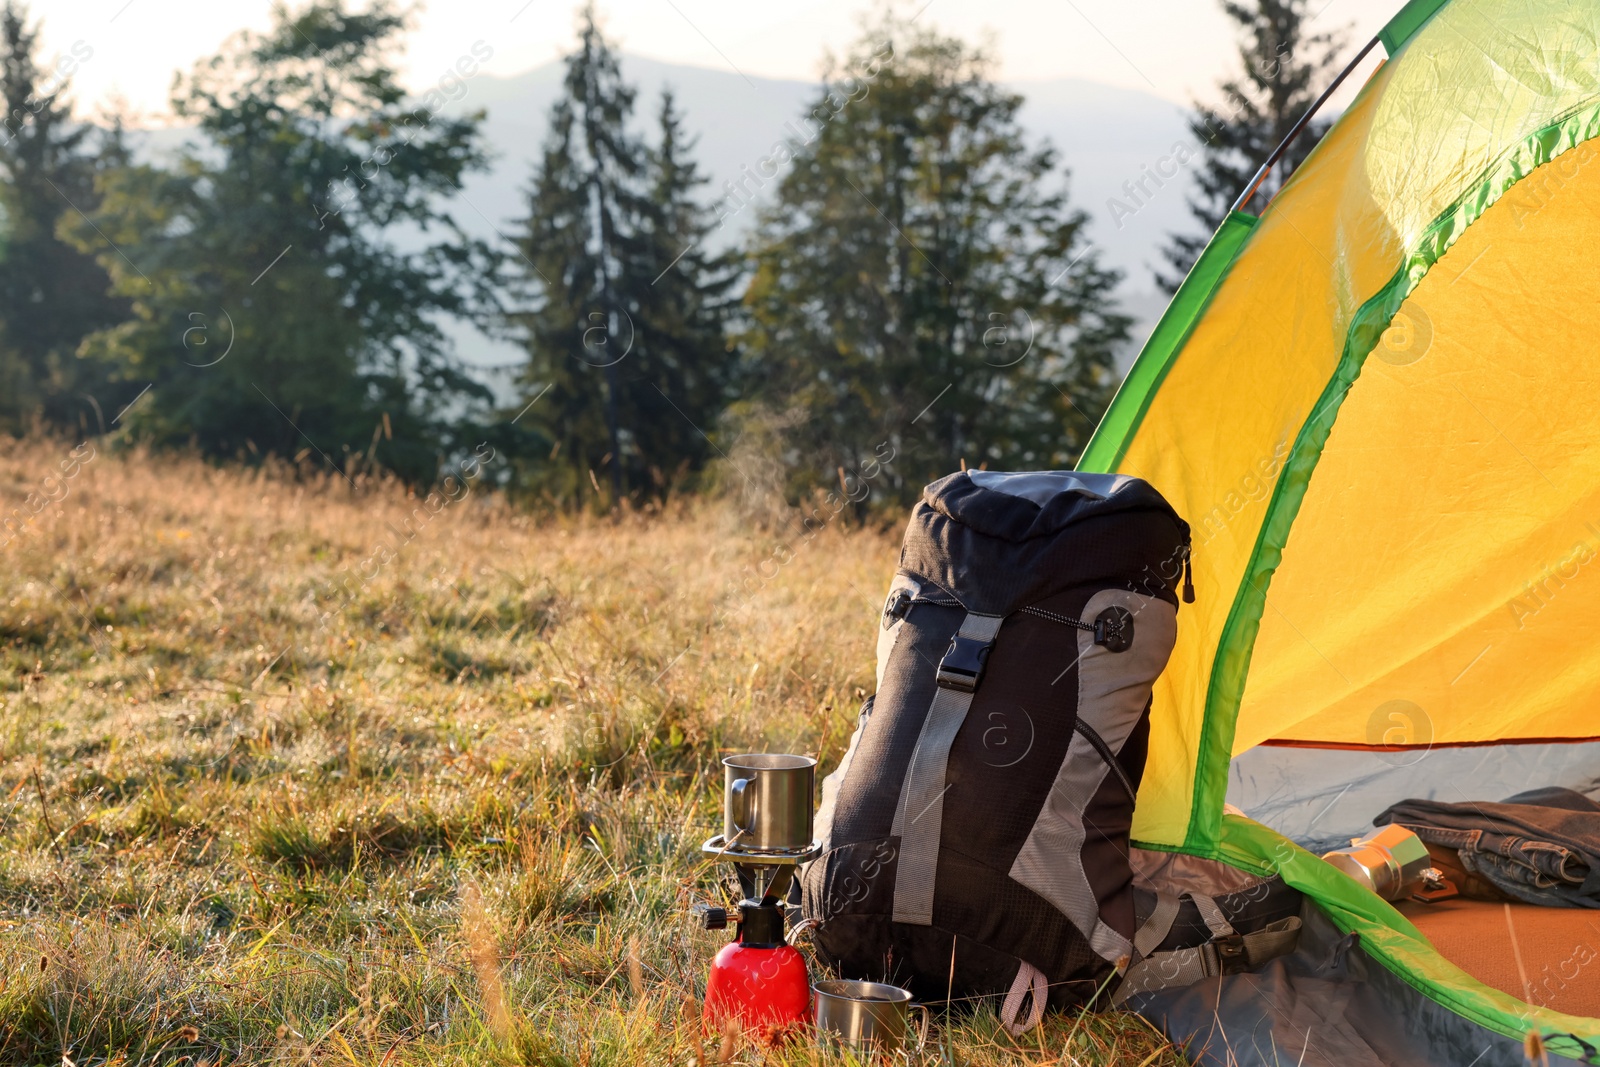 Photo of Backpack and tourist equipment near camping tent in nature